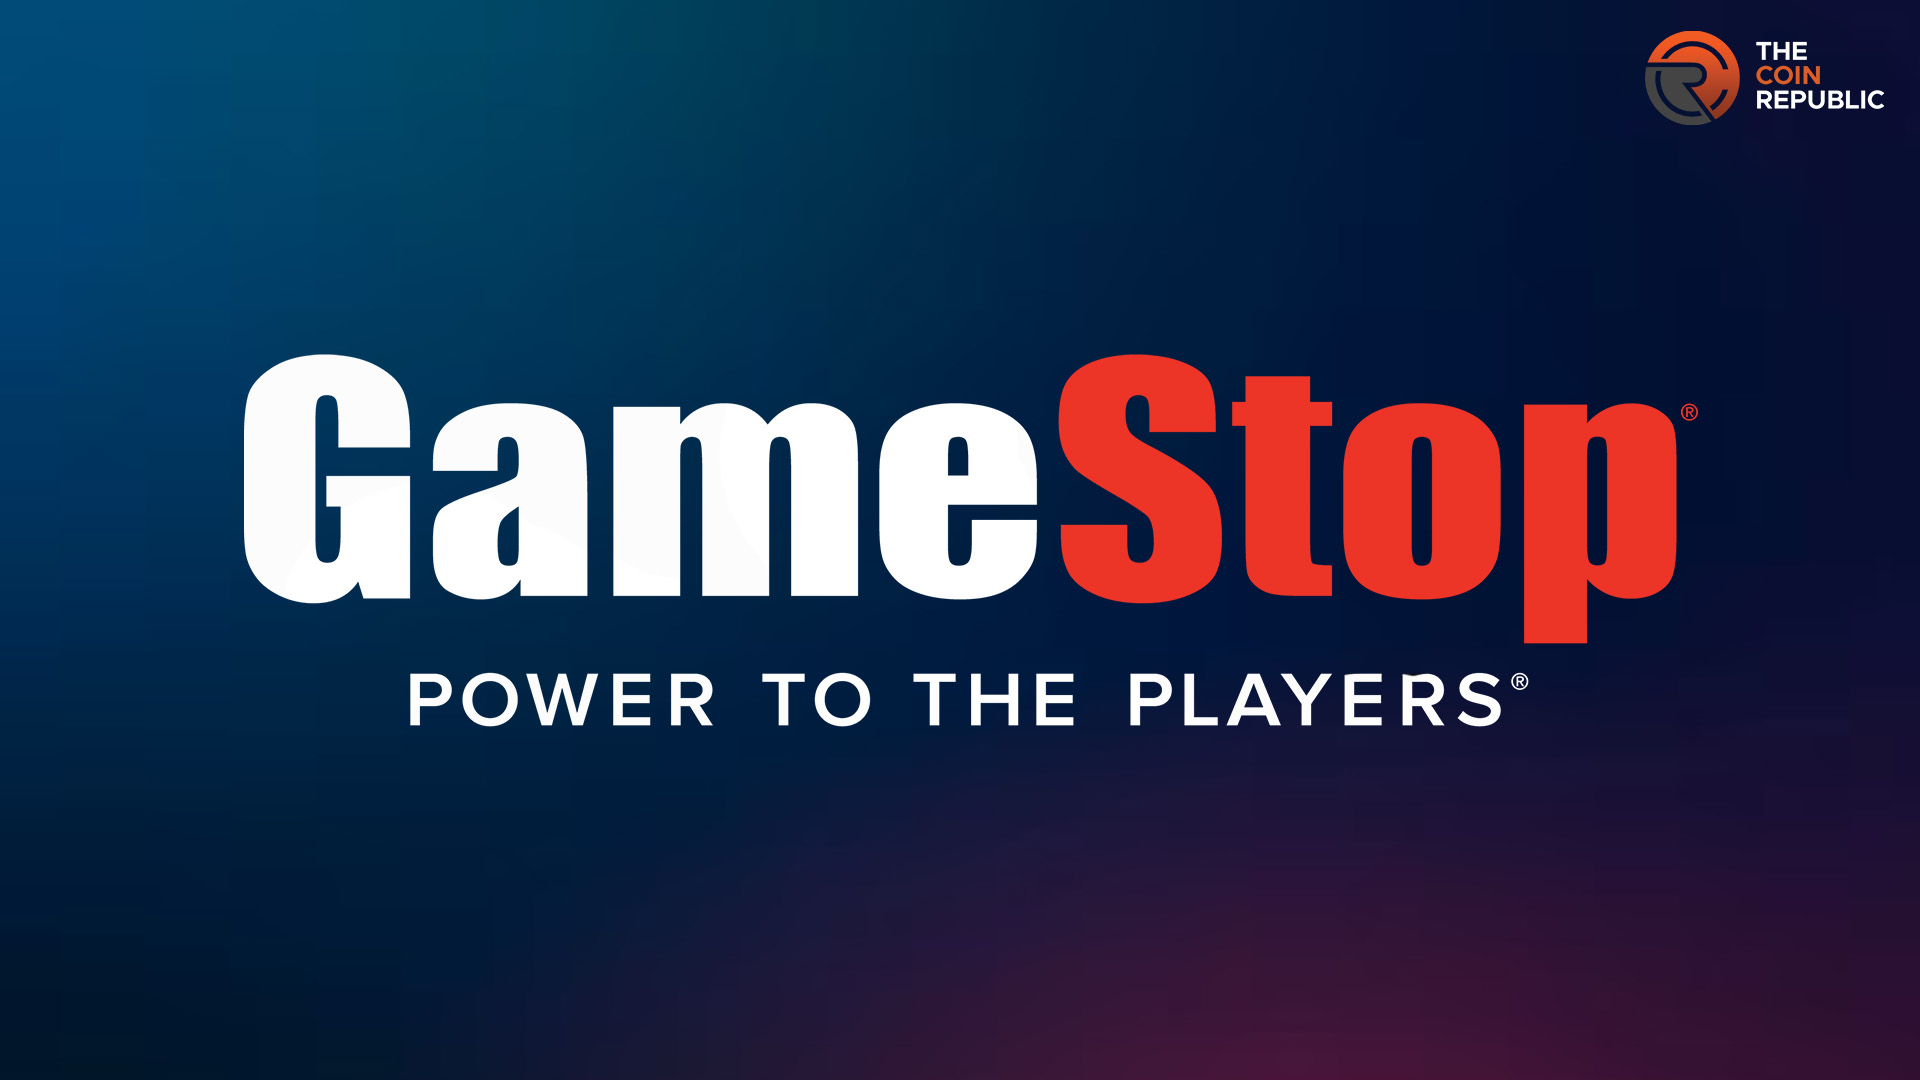 GameStop Corp.: GME Stock Price Ready For a Rebound to $27 Mark